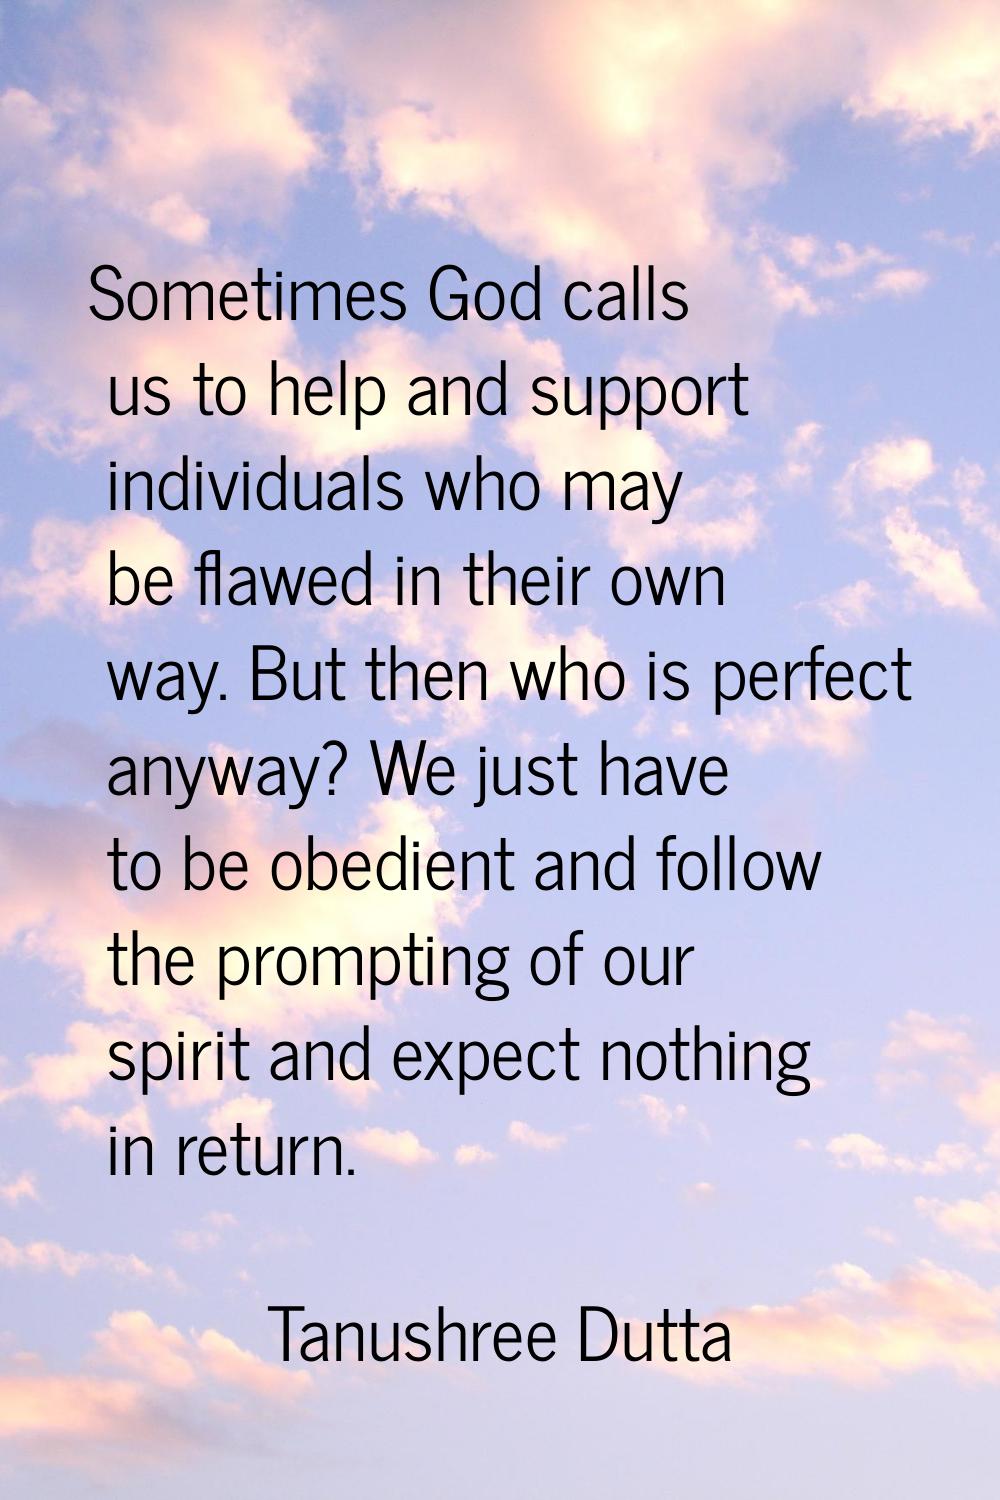 Sometimes God calls us to help and support individuals who may be flawed in their own way. But then